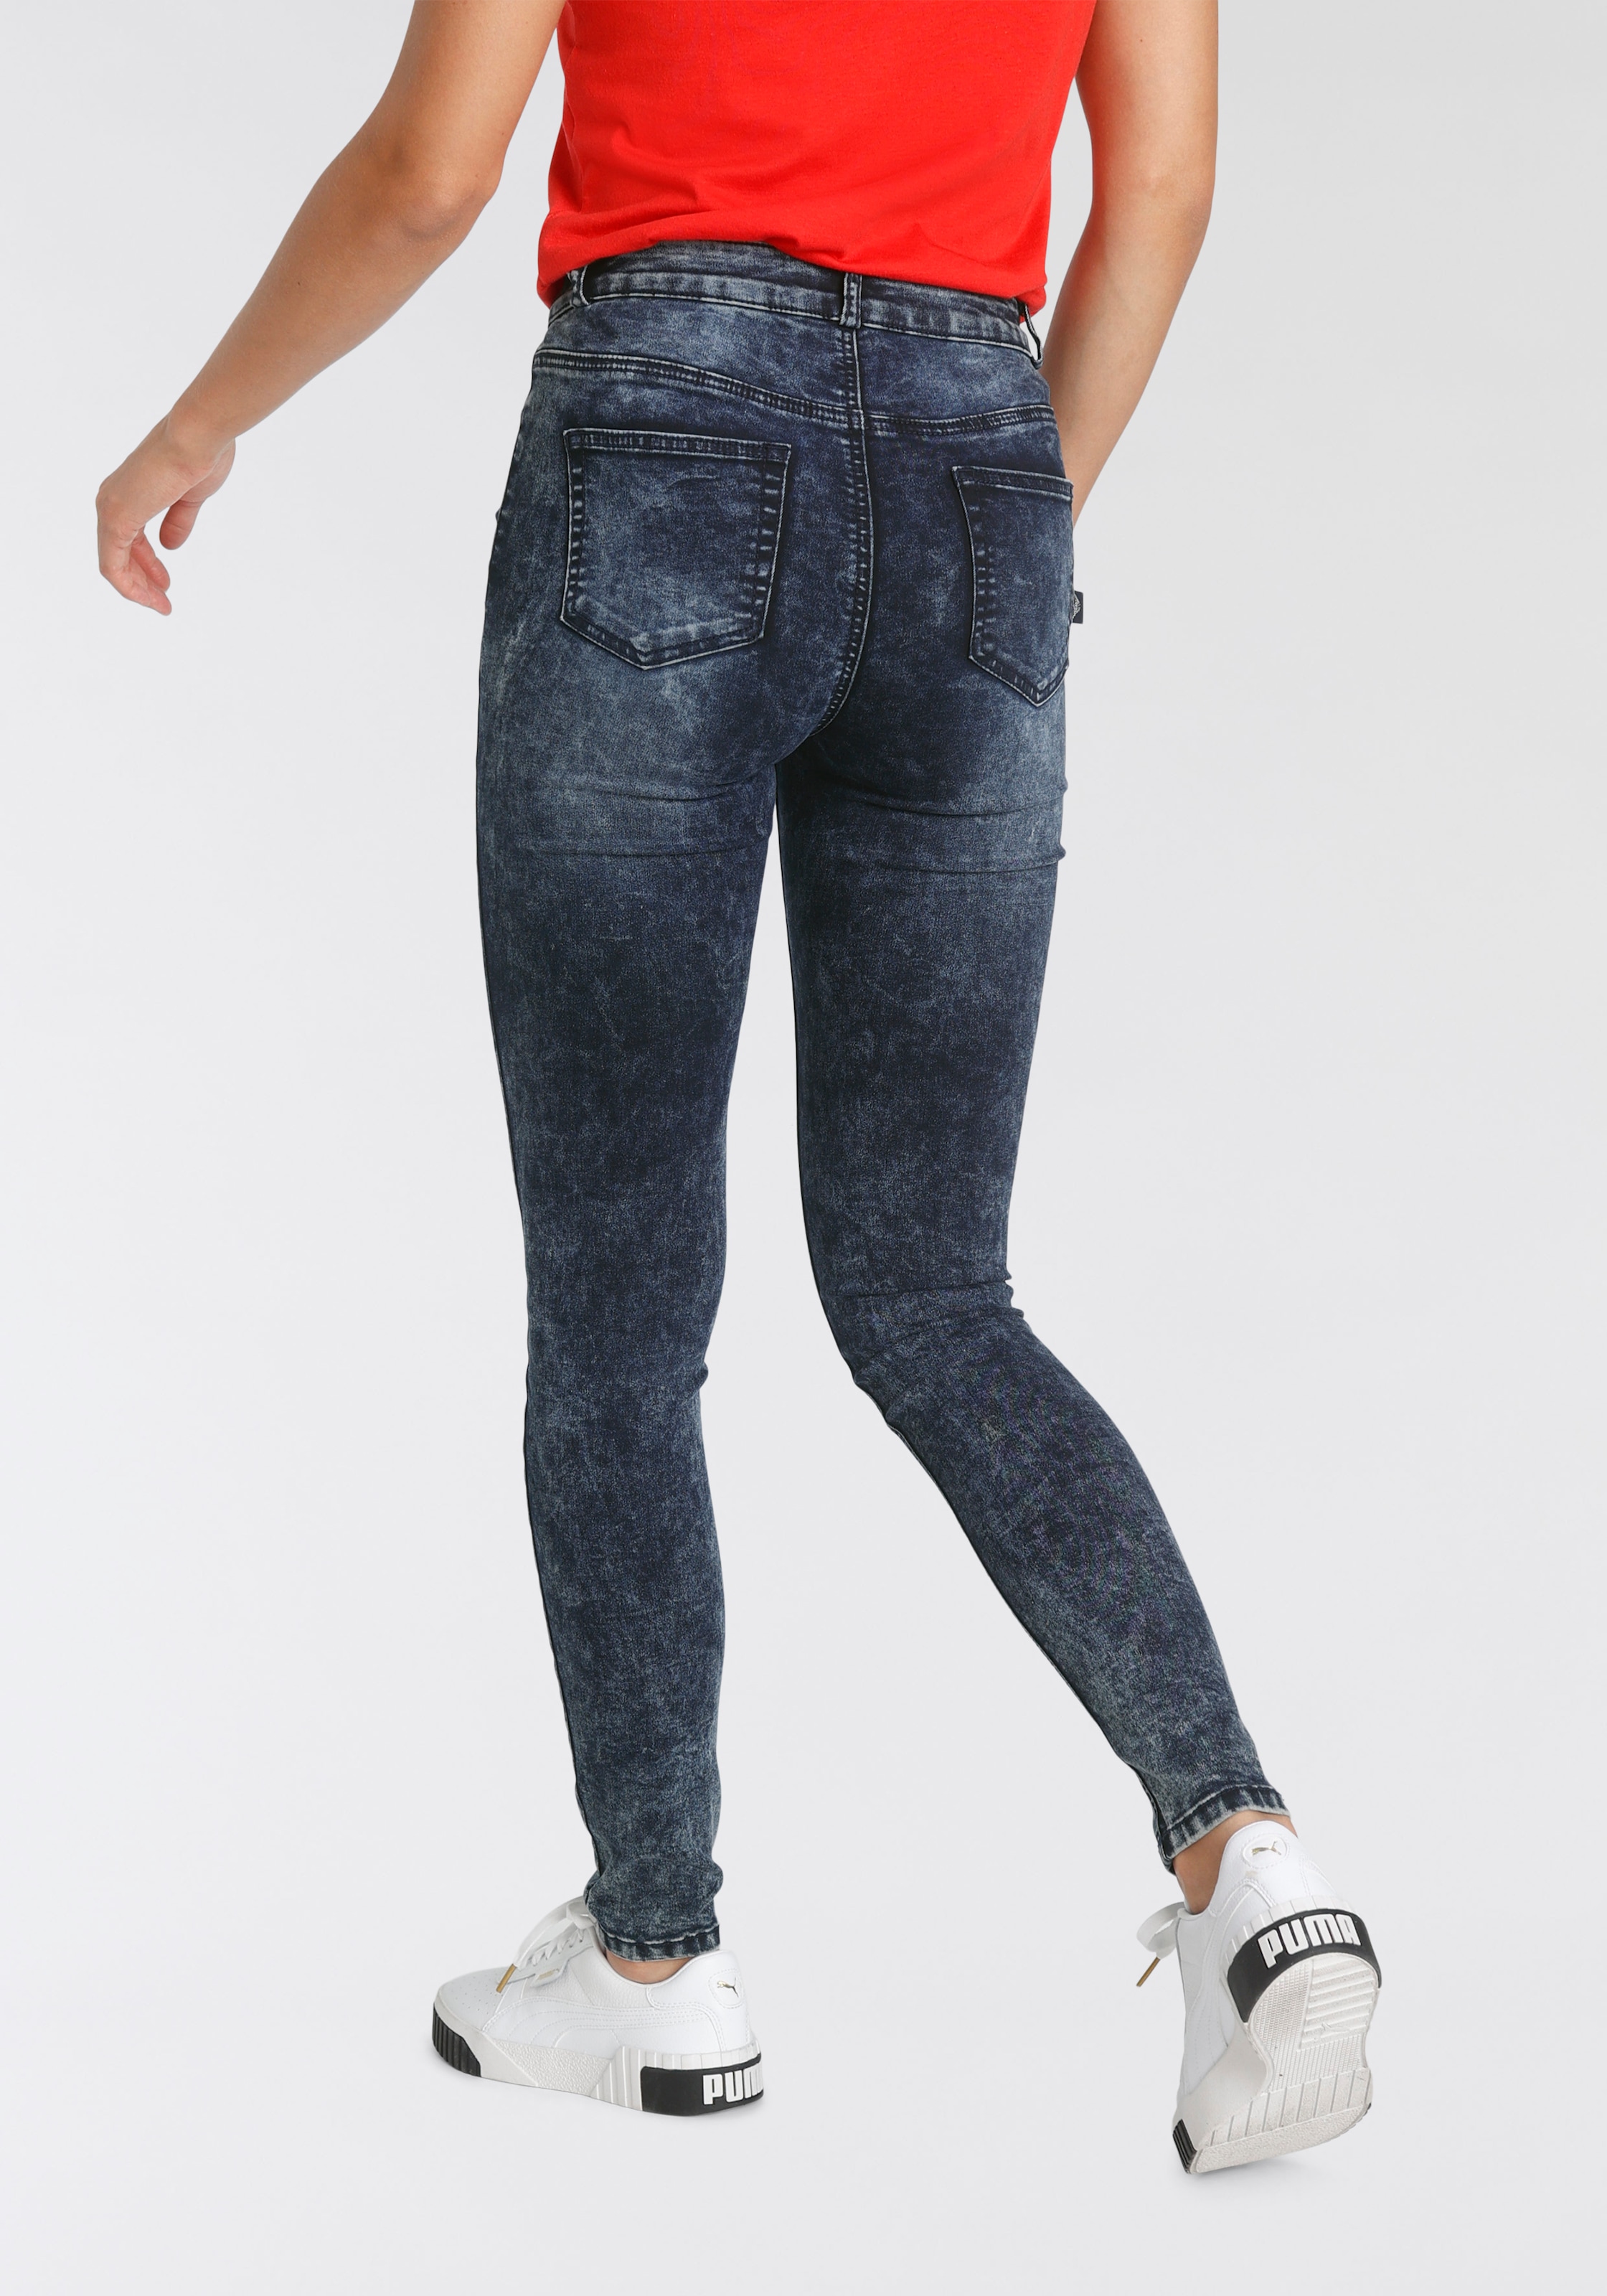 Arizona Skinny-fit-Jeans »Ultra Stretch moon washed«, Moonwashed Jeans  online kaufen